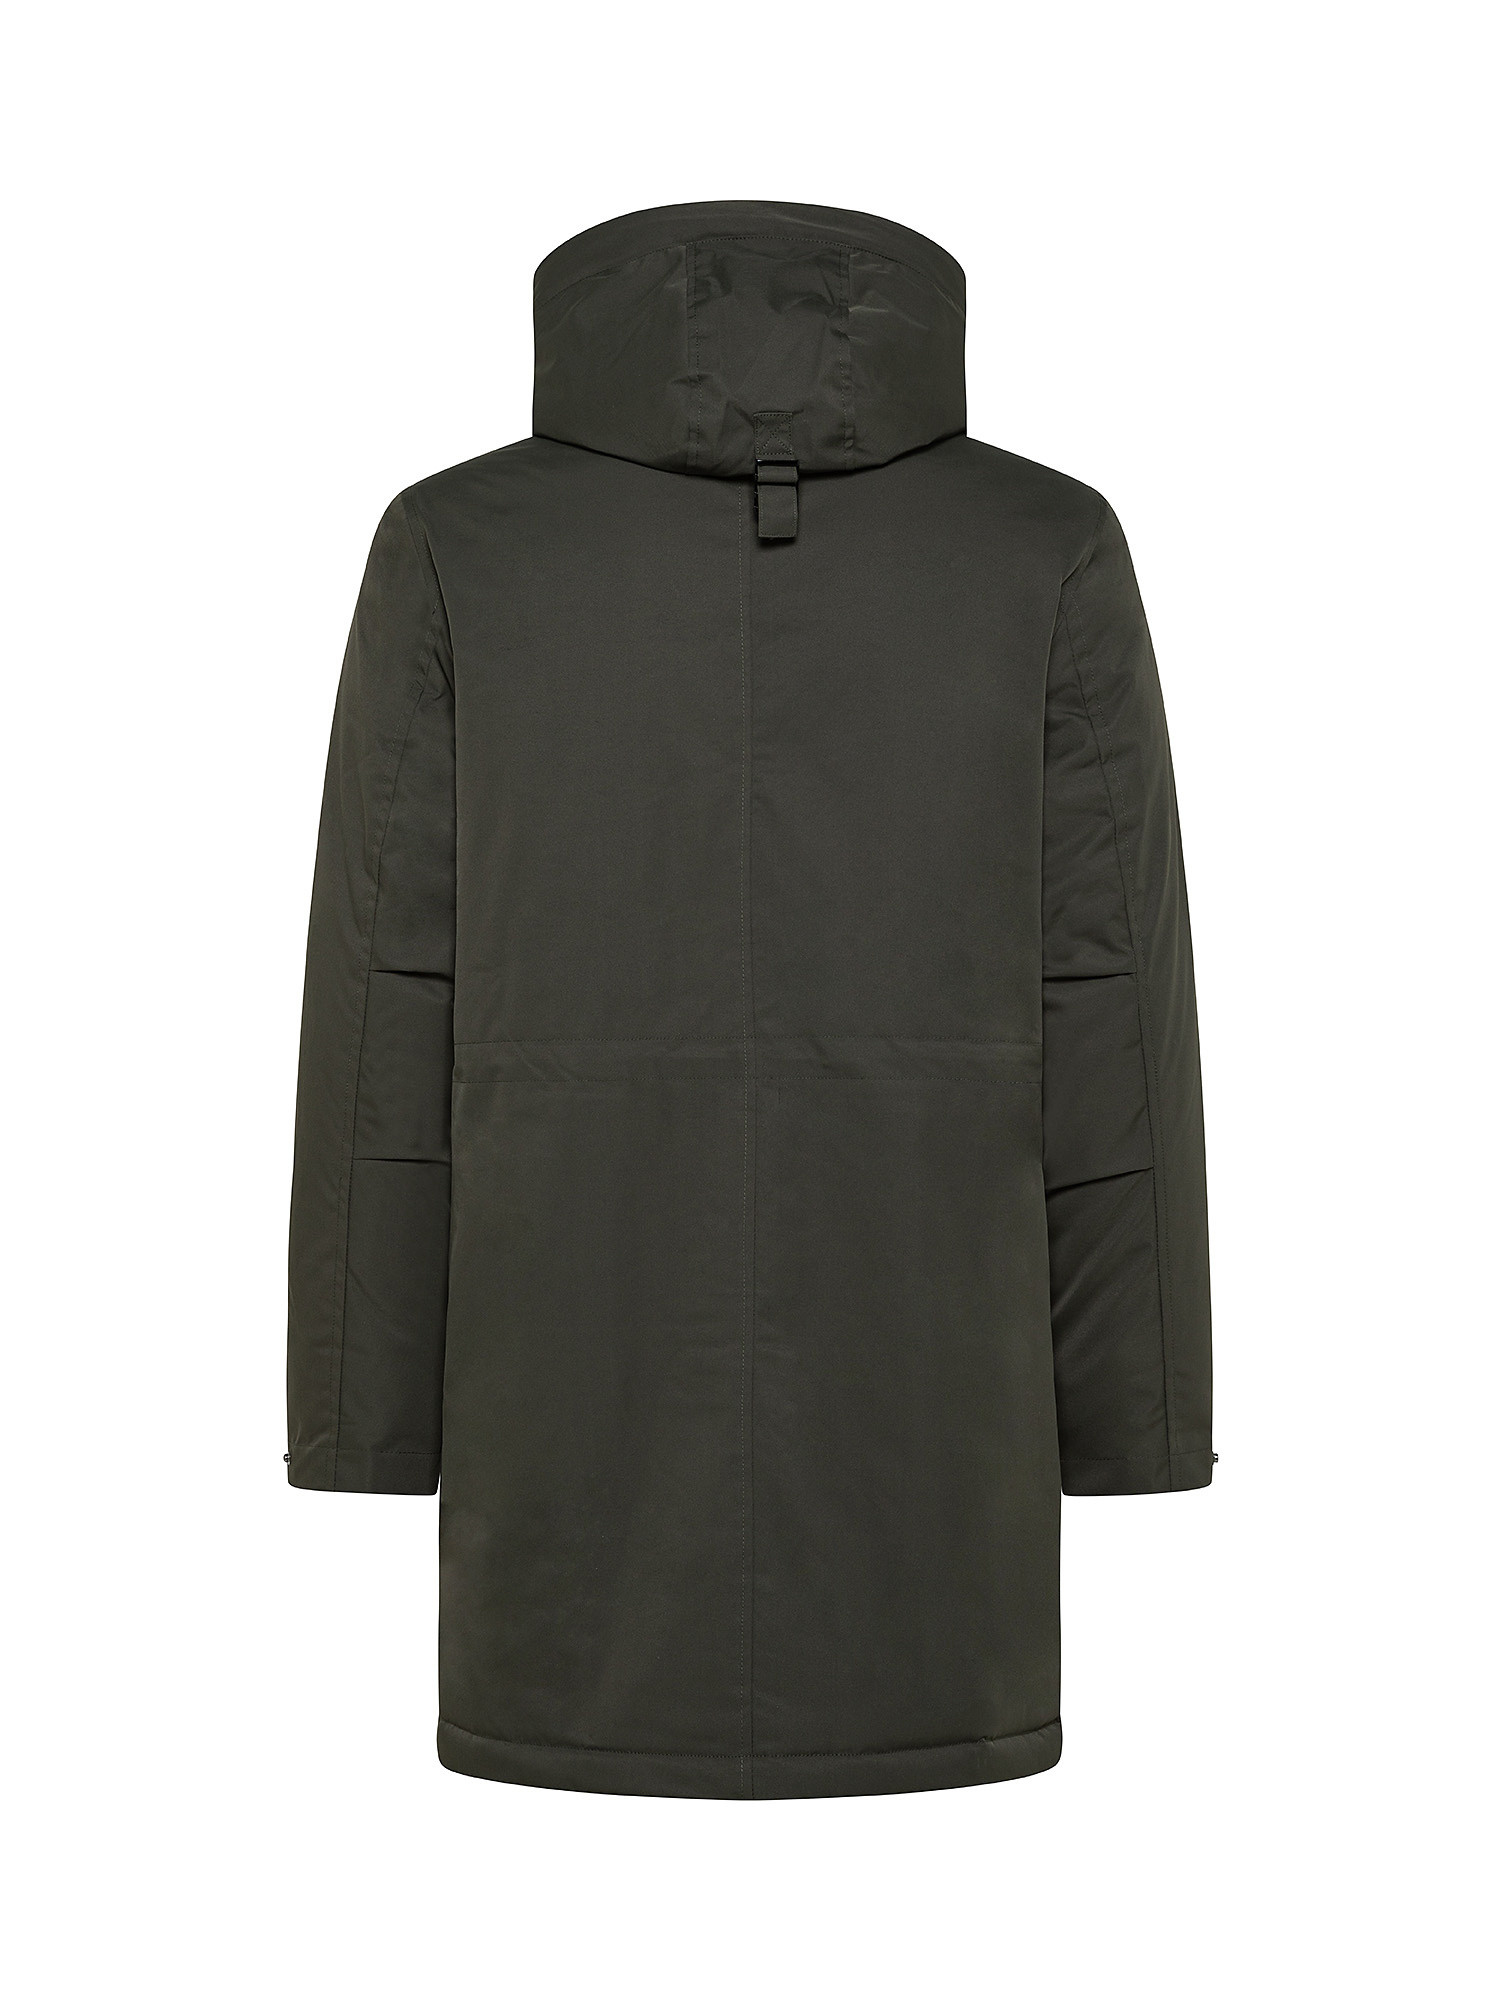 Padded technical coat with hood, Olive Green, large image number 1